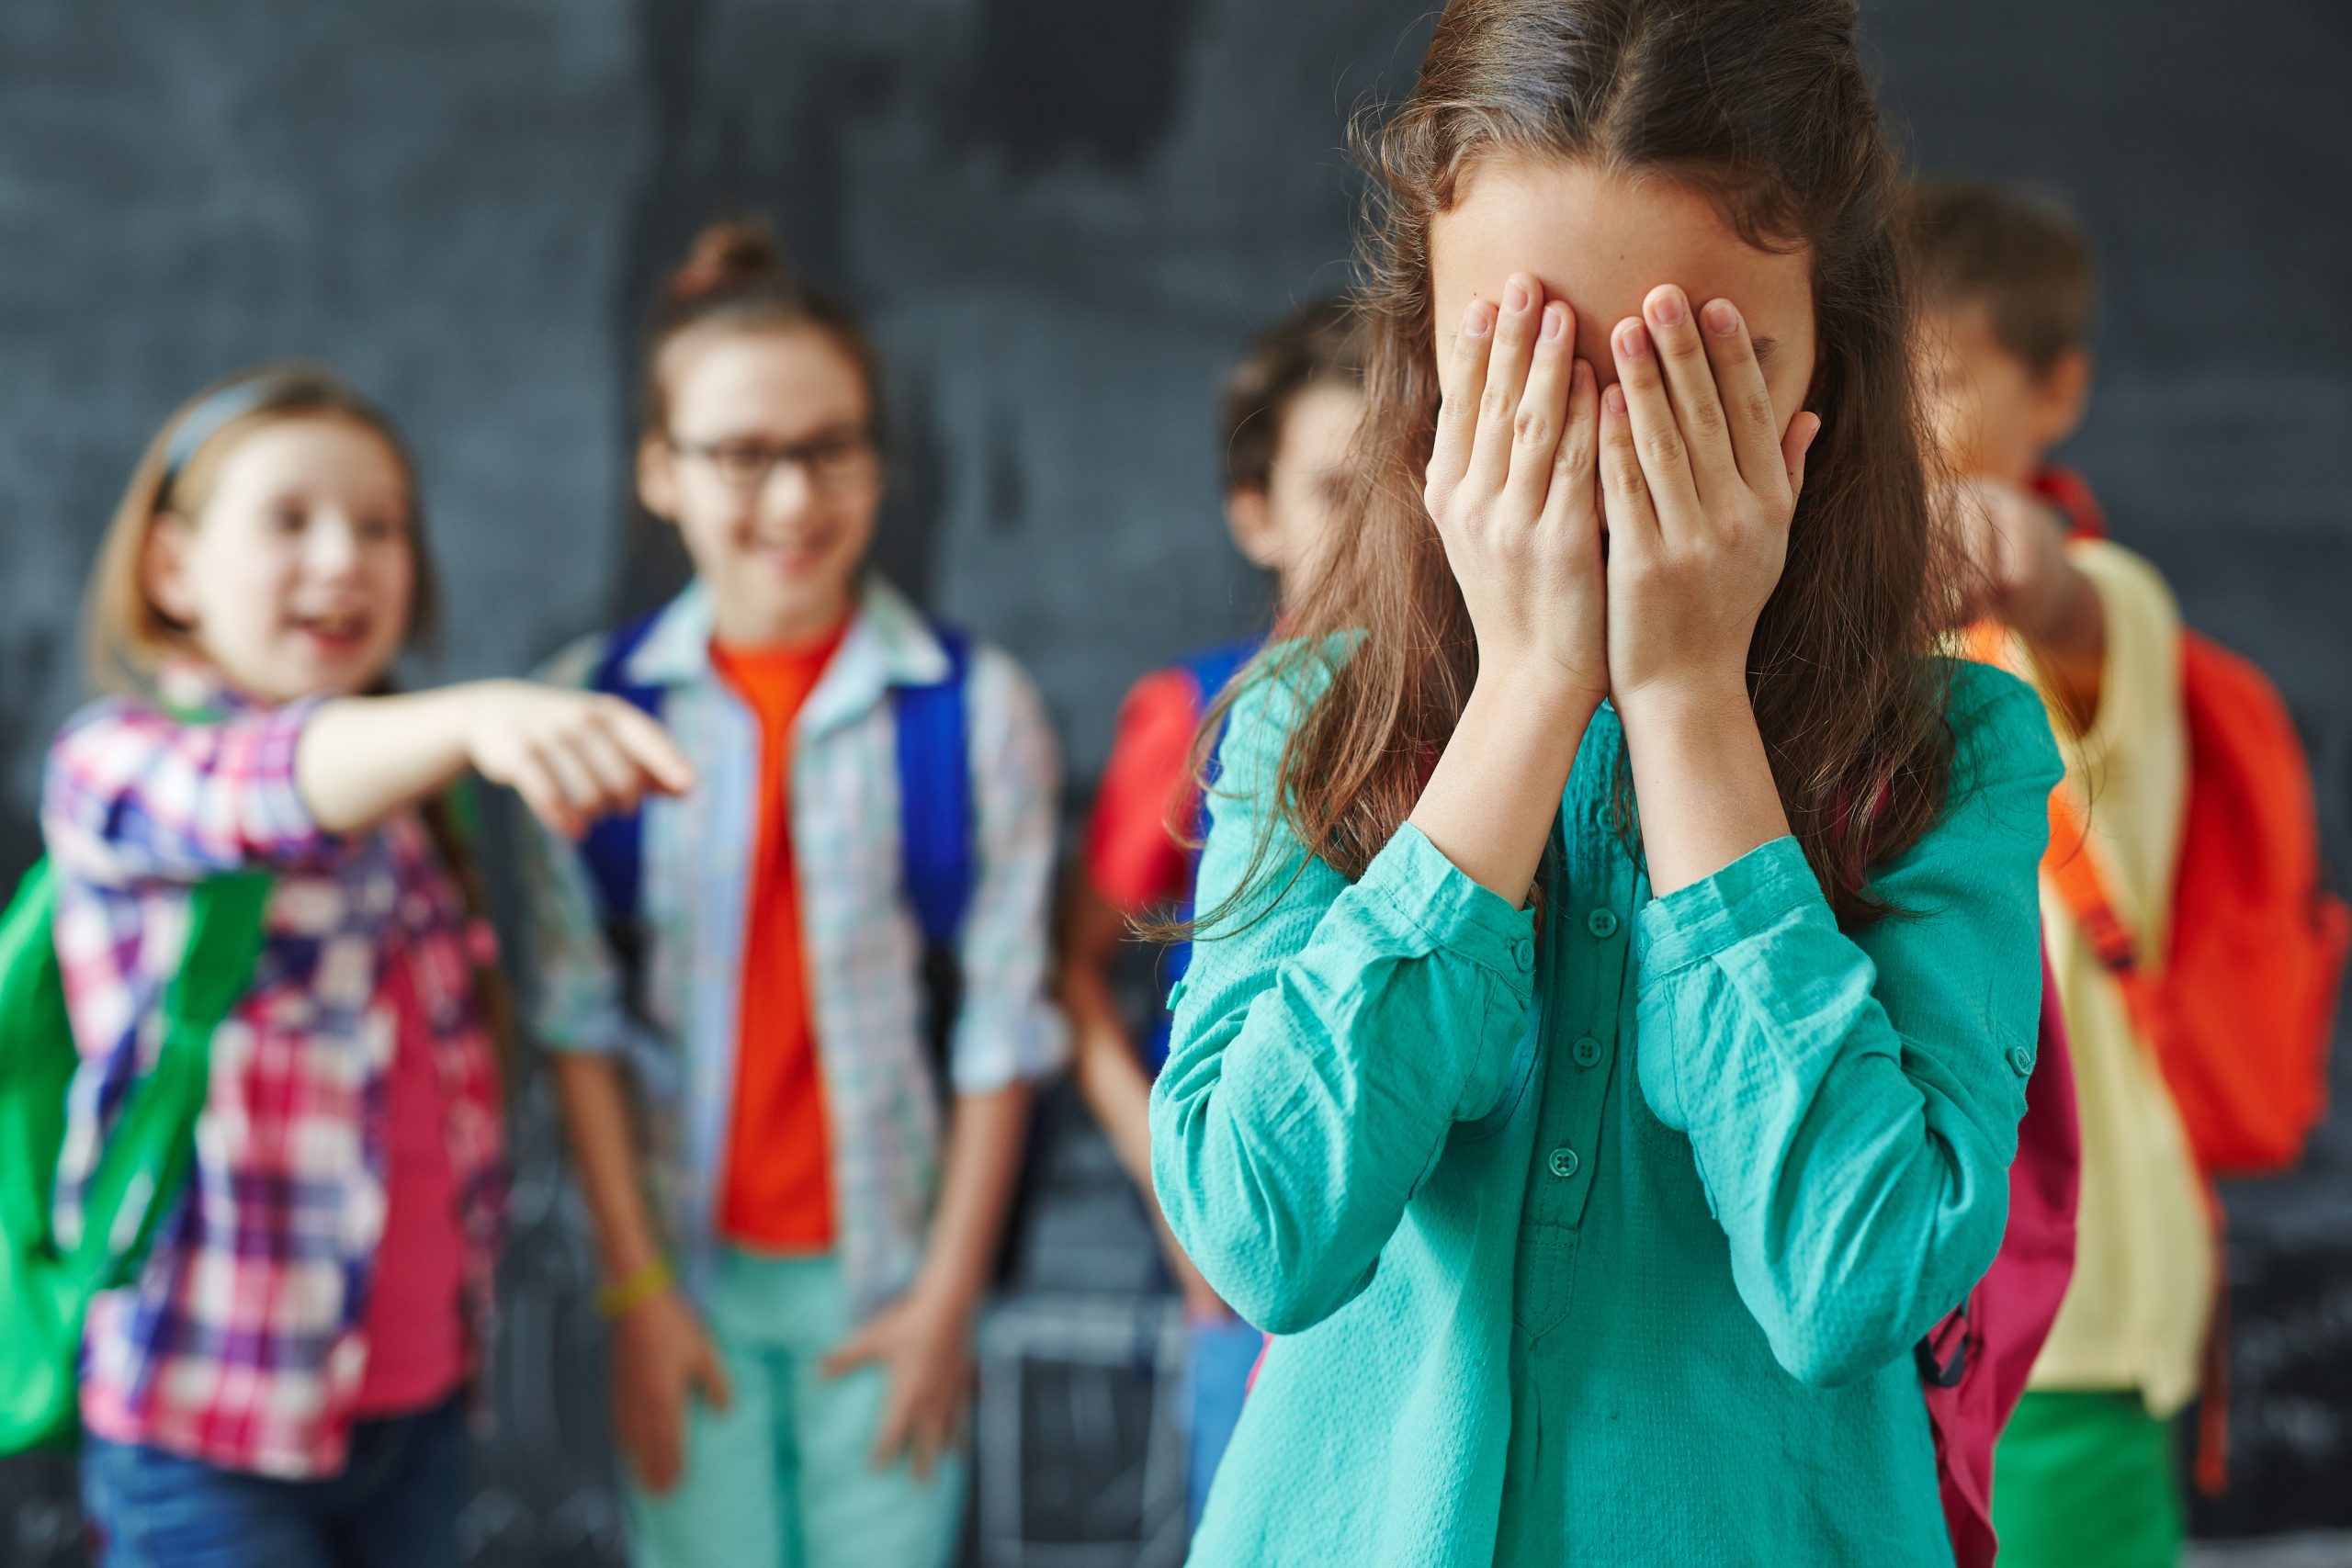 Publication – Bullying in schools, influences of disadvantage and mental health